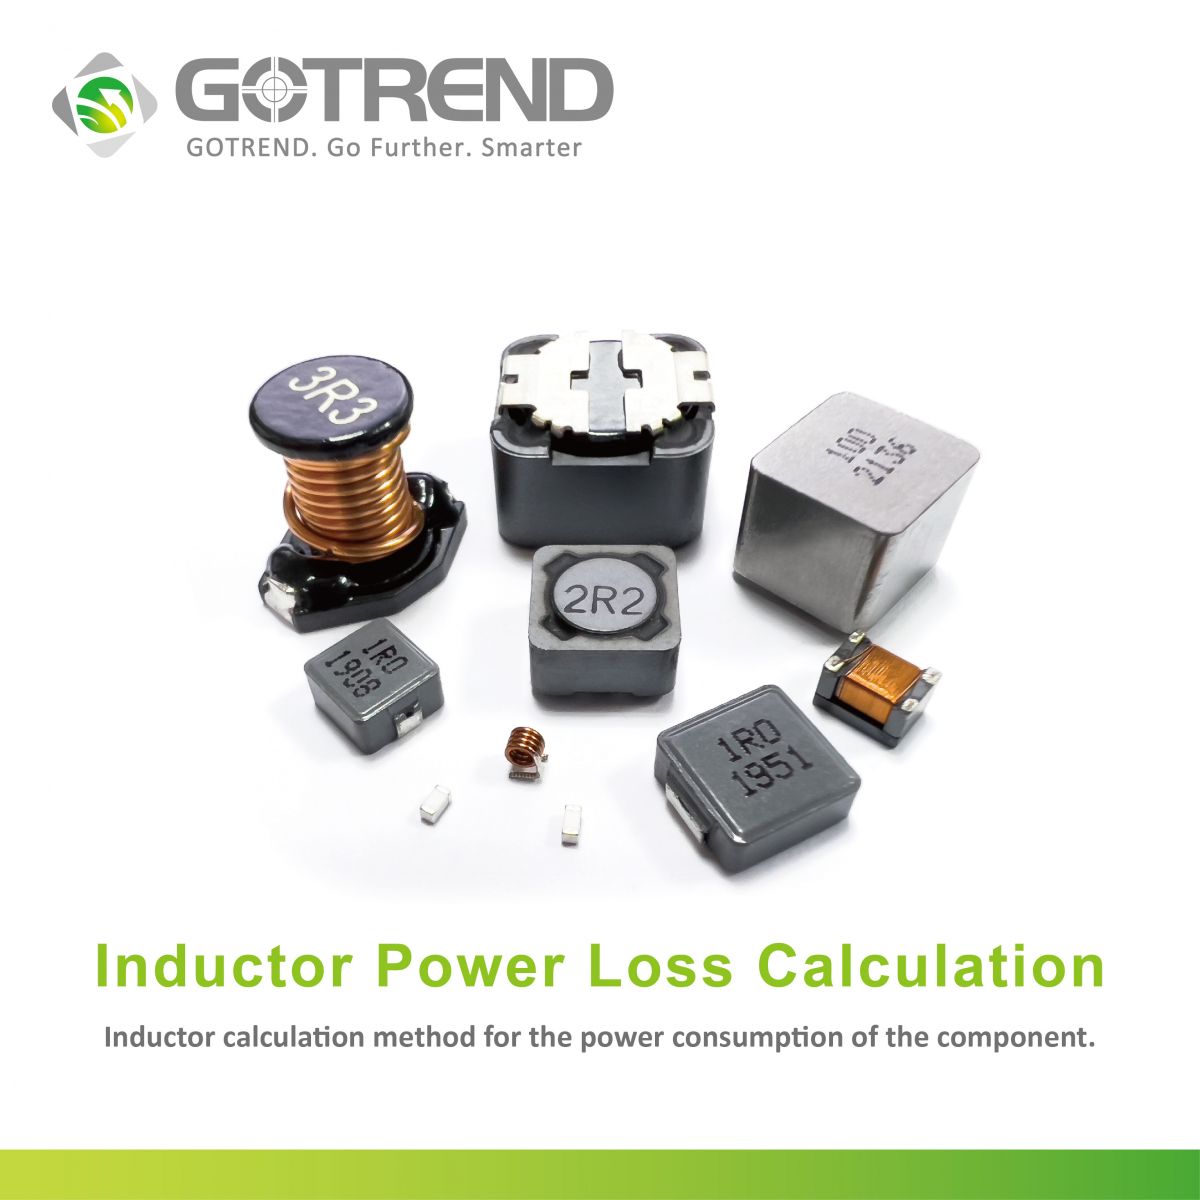 Inductor power loss calculation